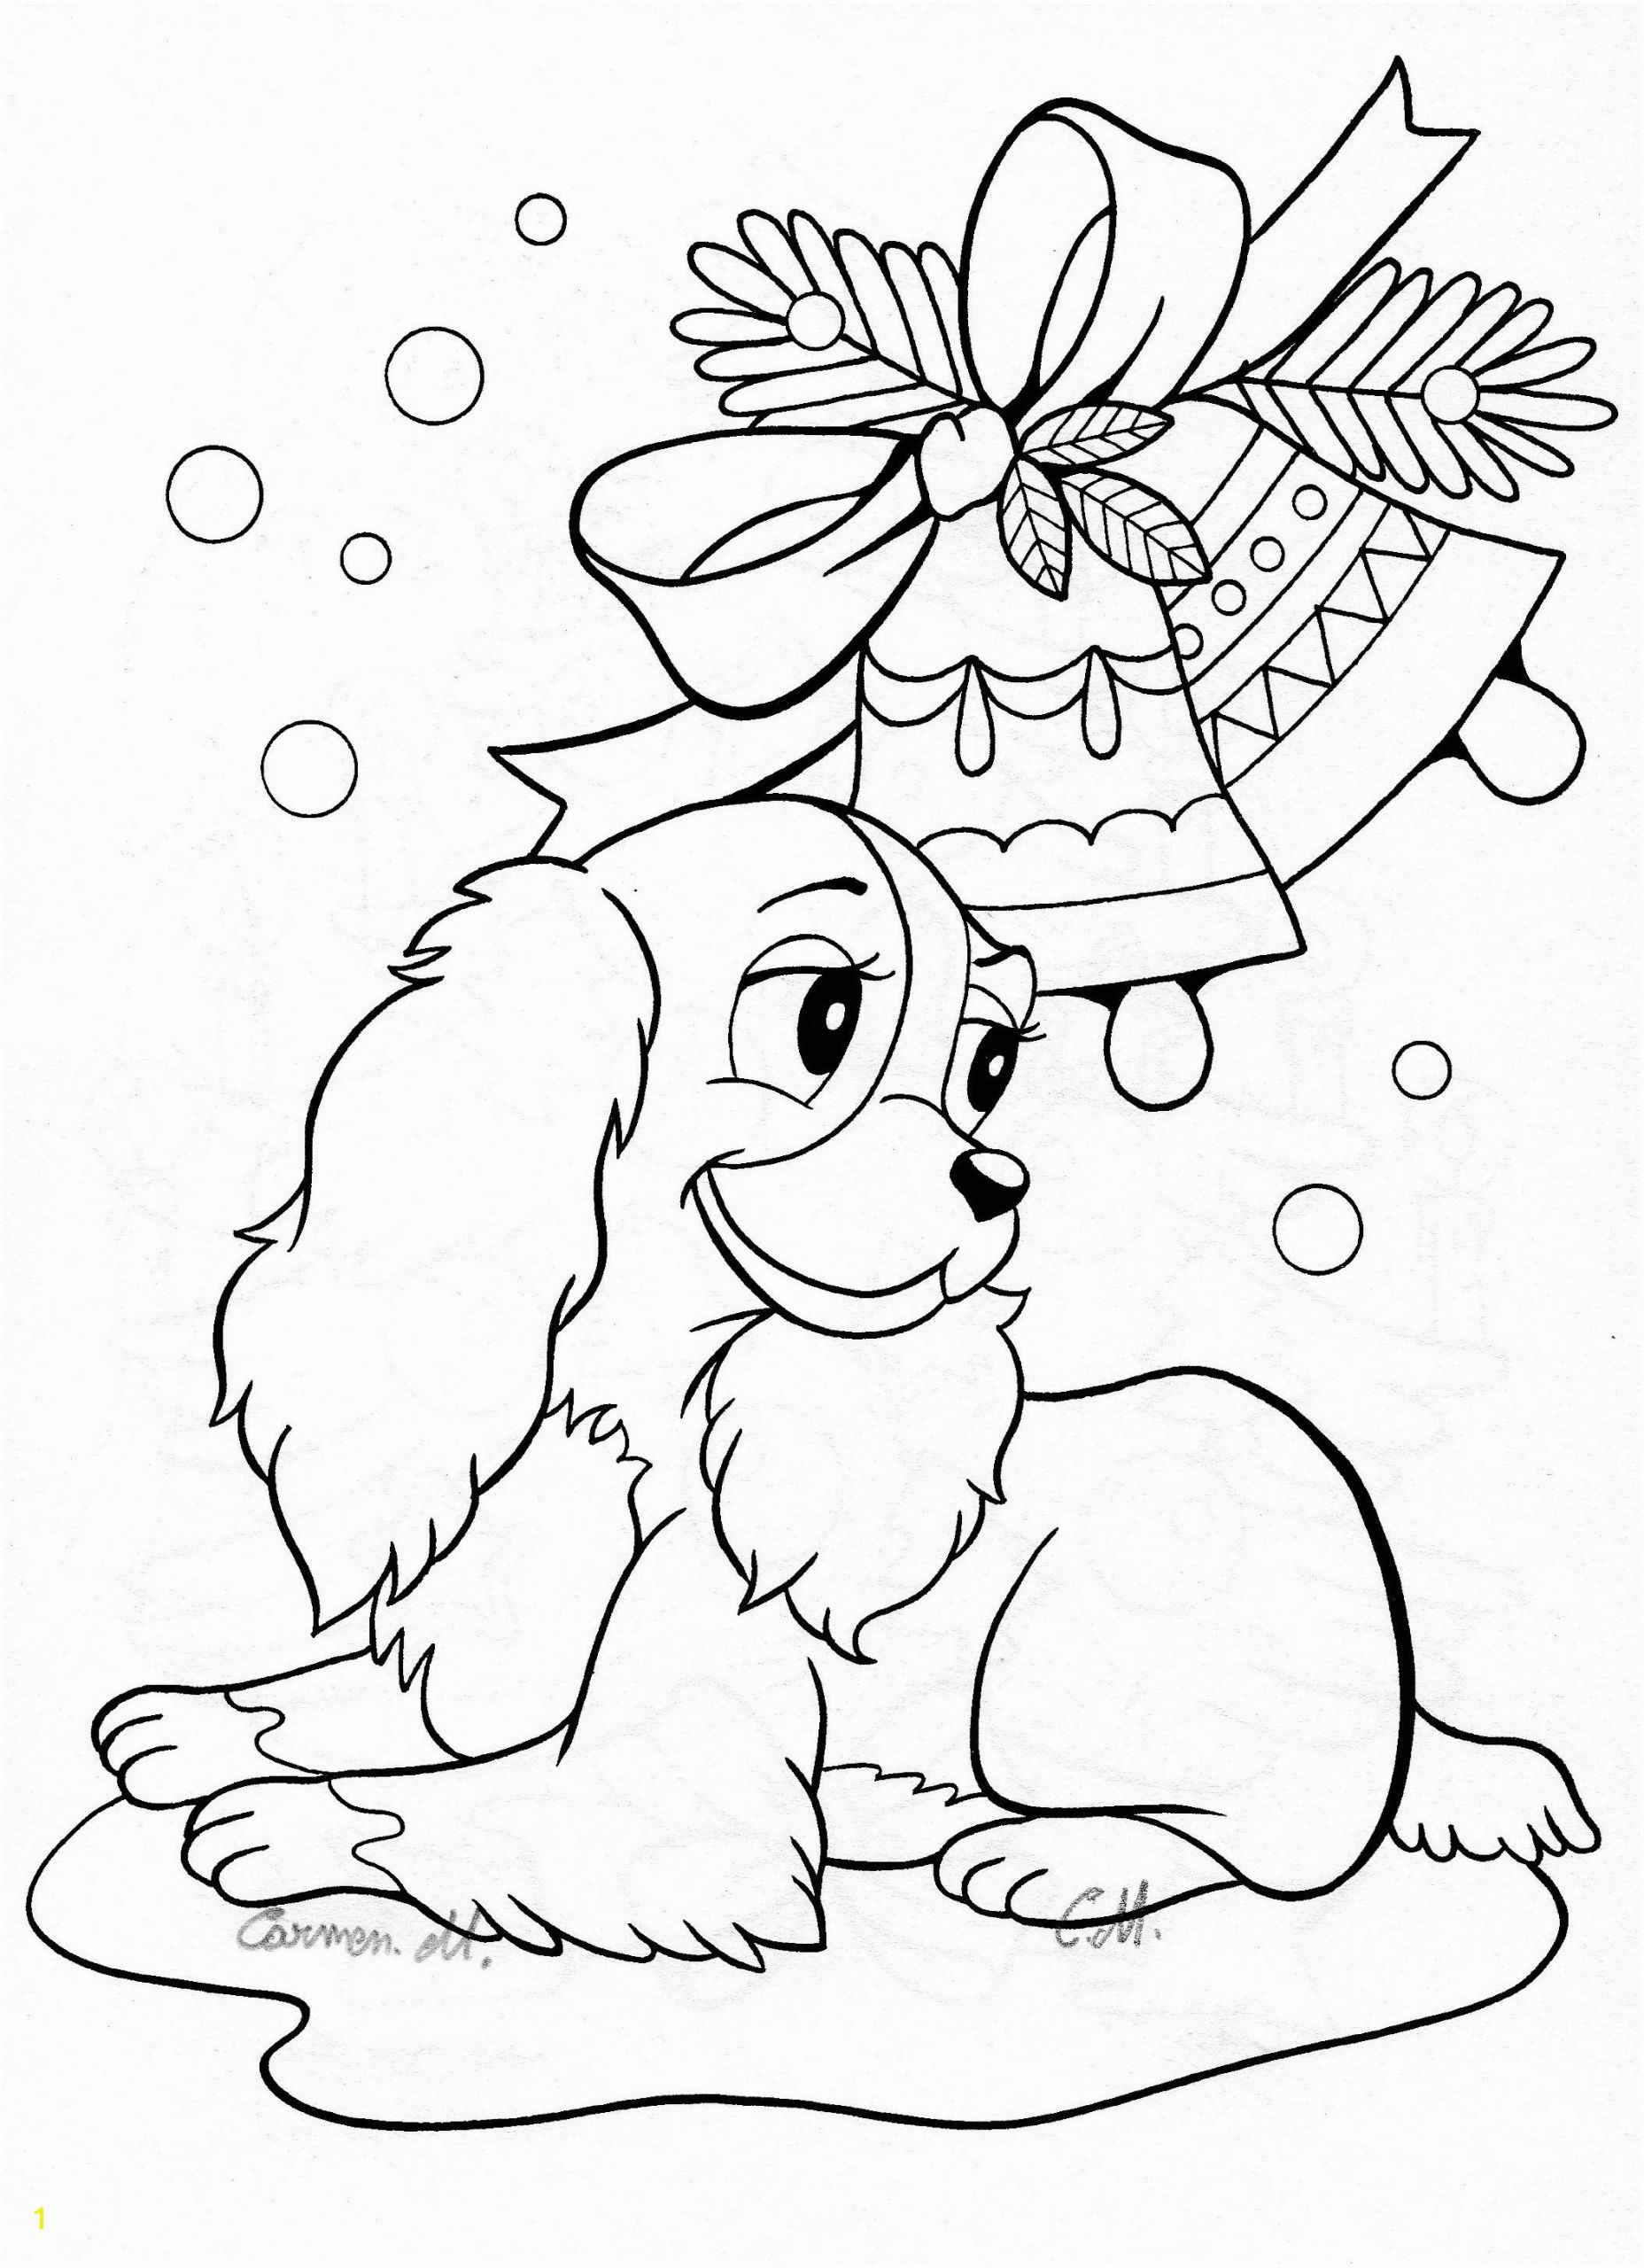 Coloring Pages for Kids Frozen Best Coloring Christmas Pet Pages Fresh Printable Od Dog